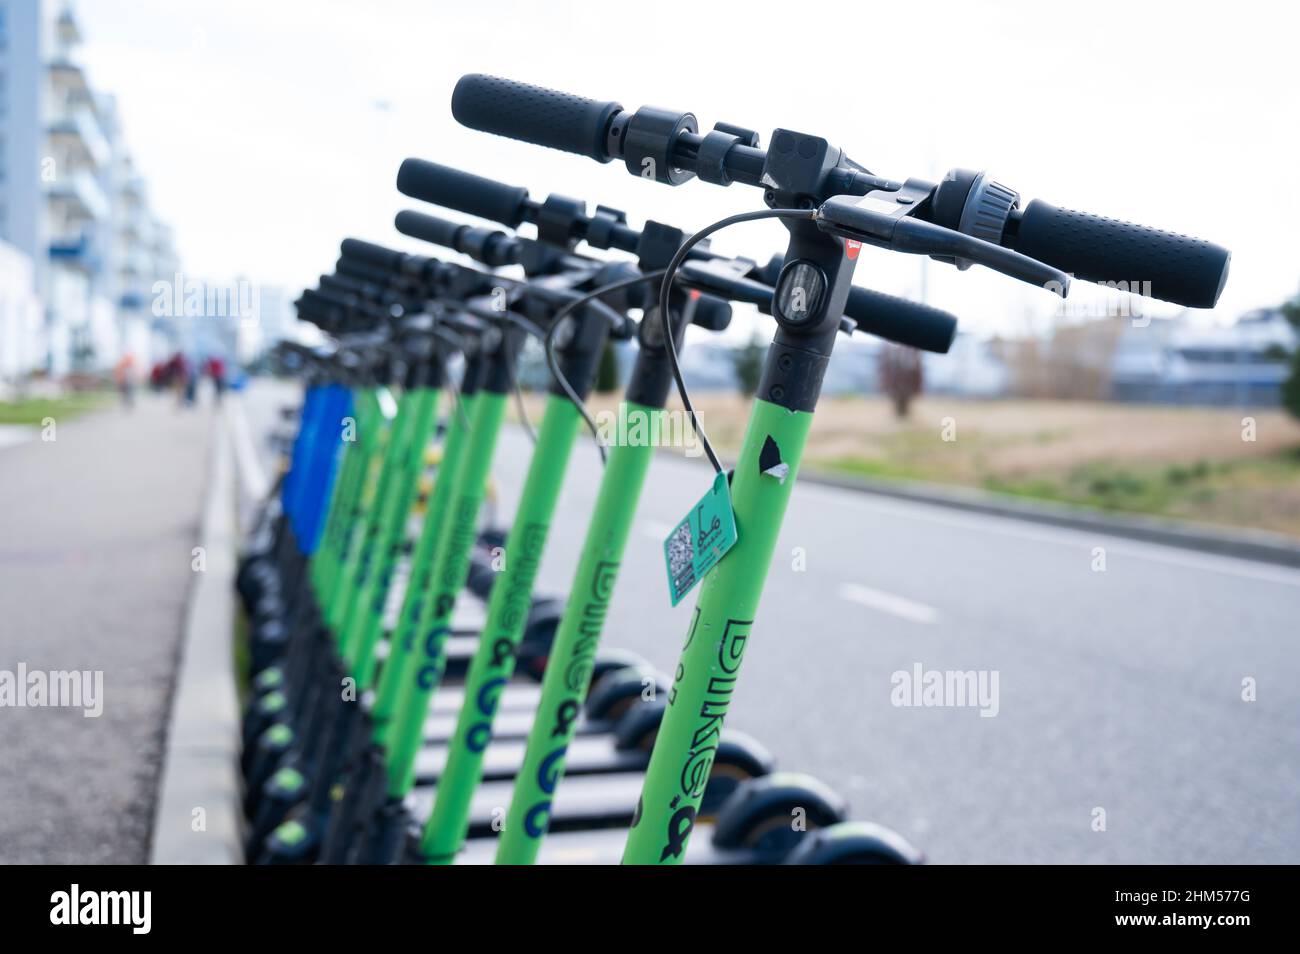 Row of electric scooters for rent outdoors. Stock Photo